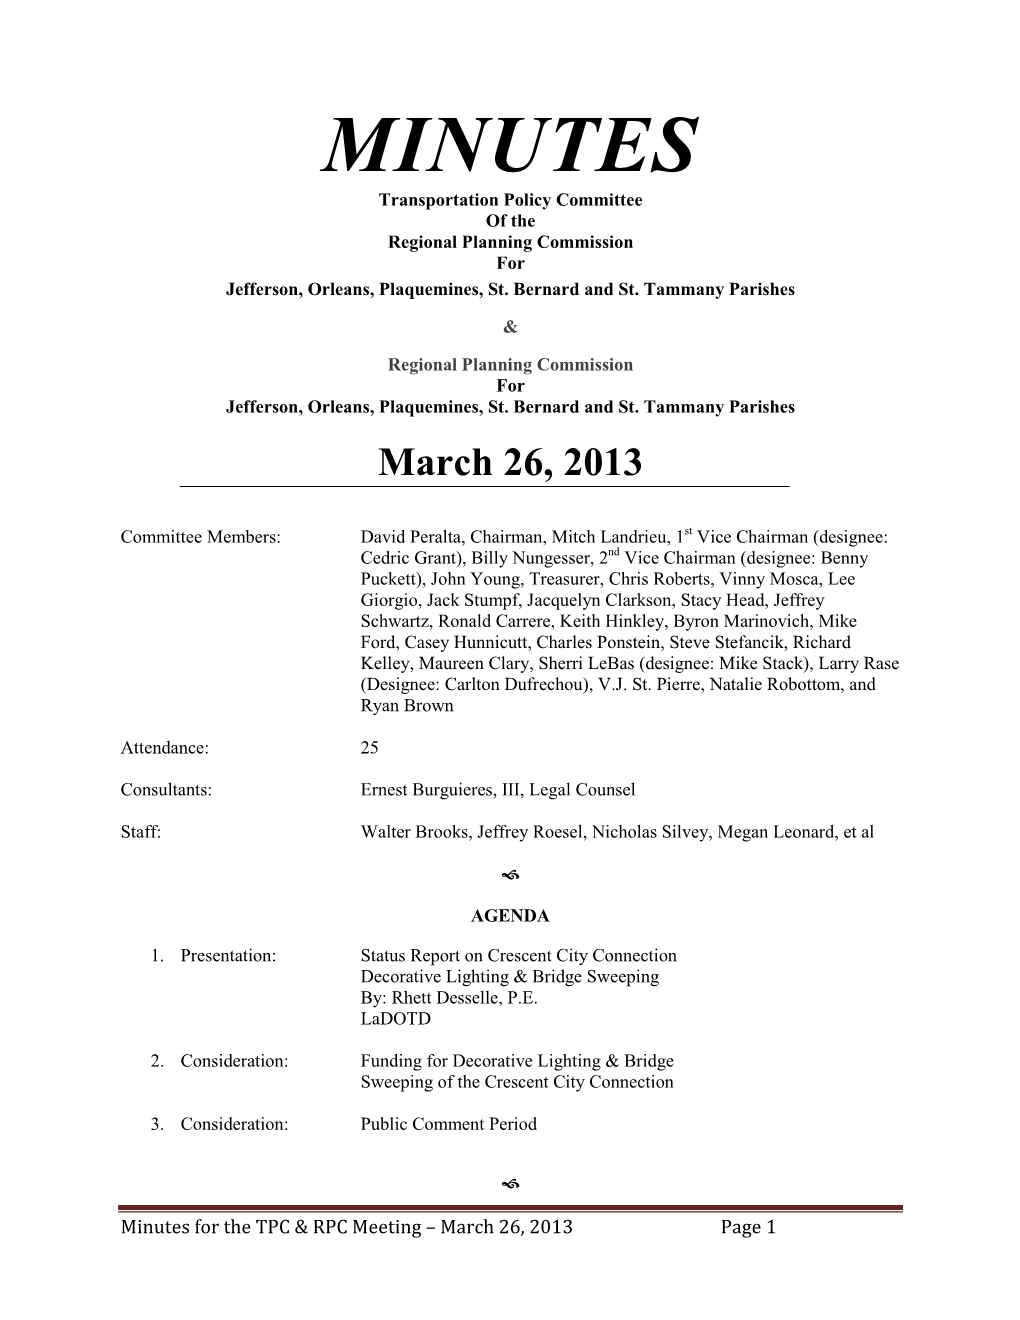 MINUTES Transportation Policy Committee of the Regional Planning Commission for Jefferson, Orleans, Plaquemines, St